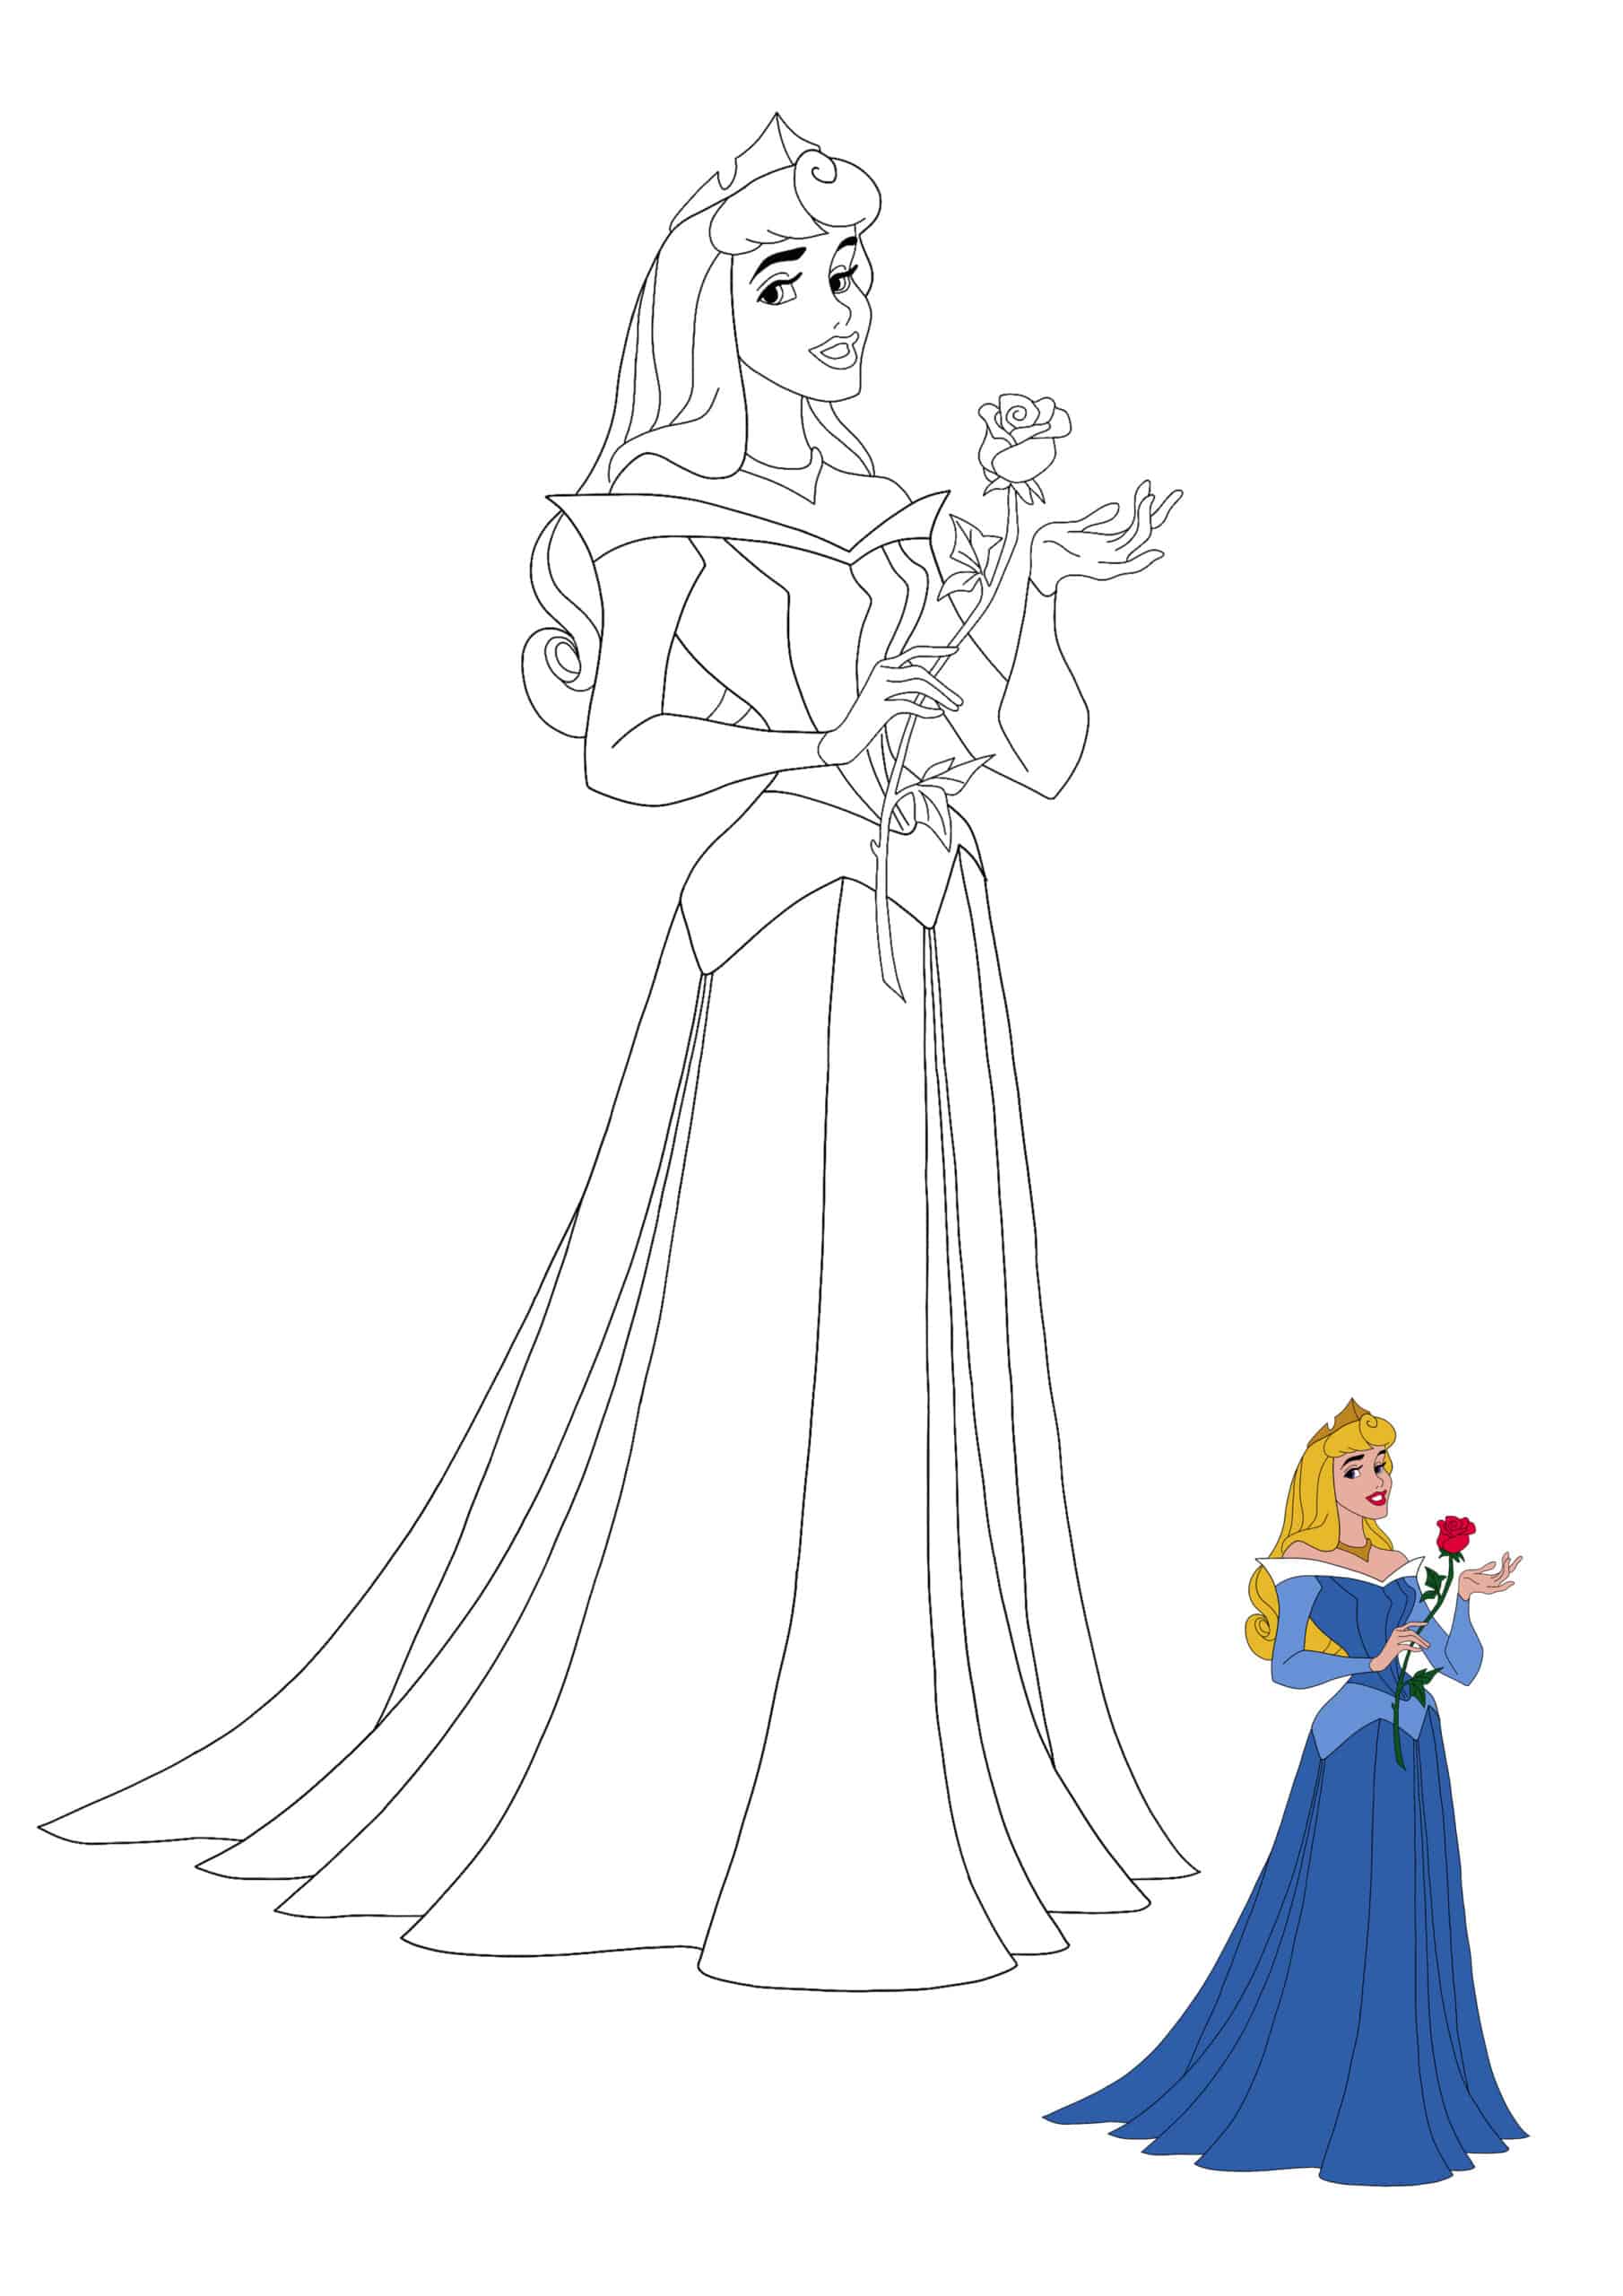 Princess Aurora From Sleeping Beauty Coloring Pages   Coloring Cool